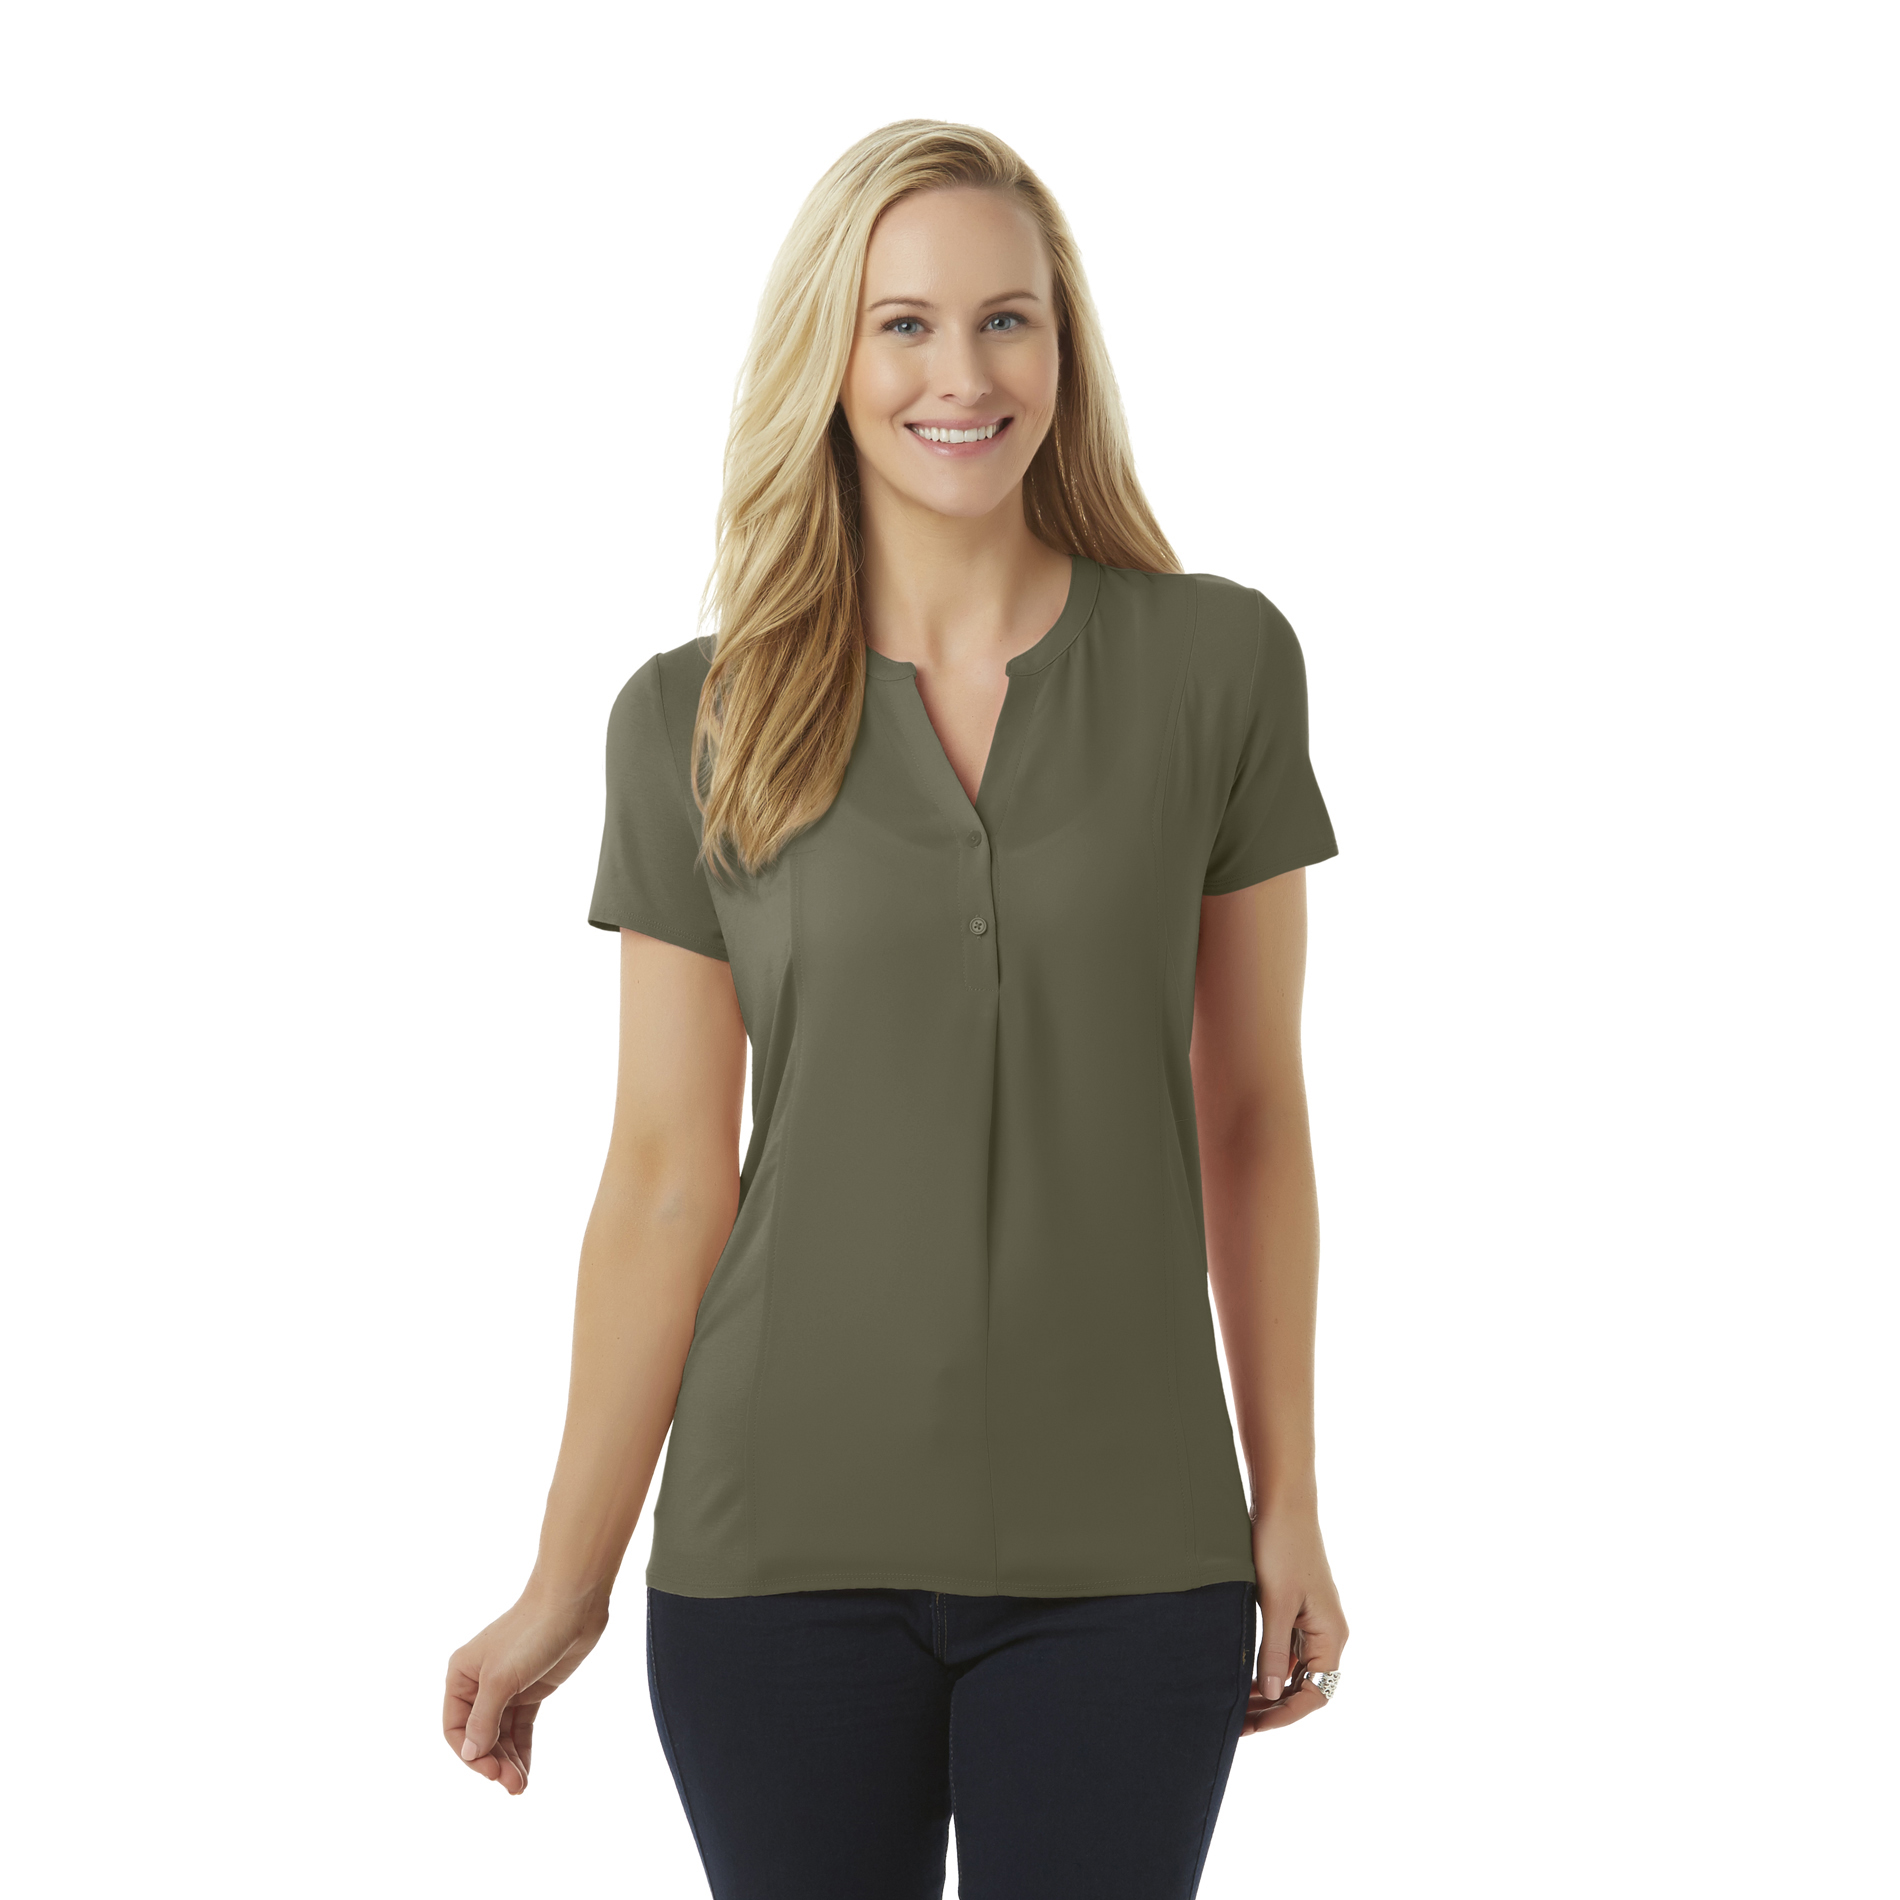 Attention Women's Mixed Media Top